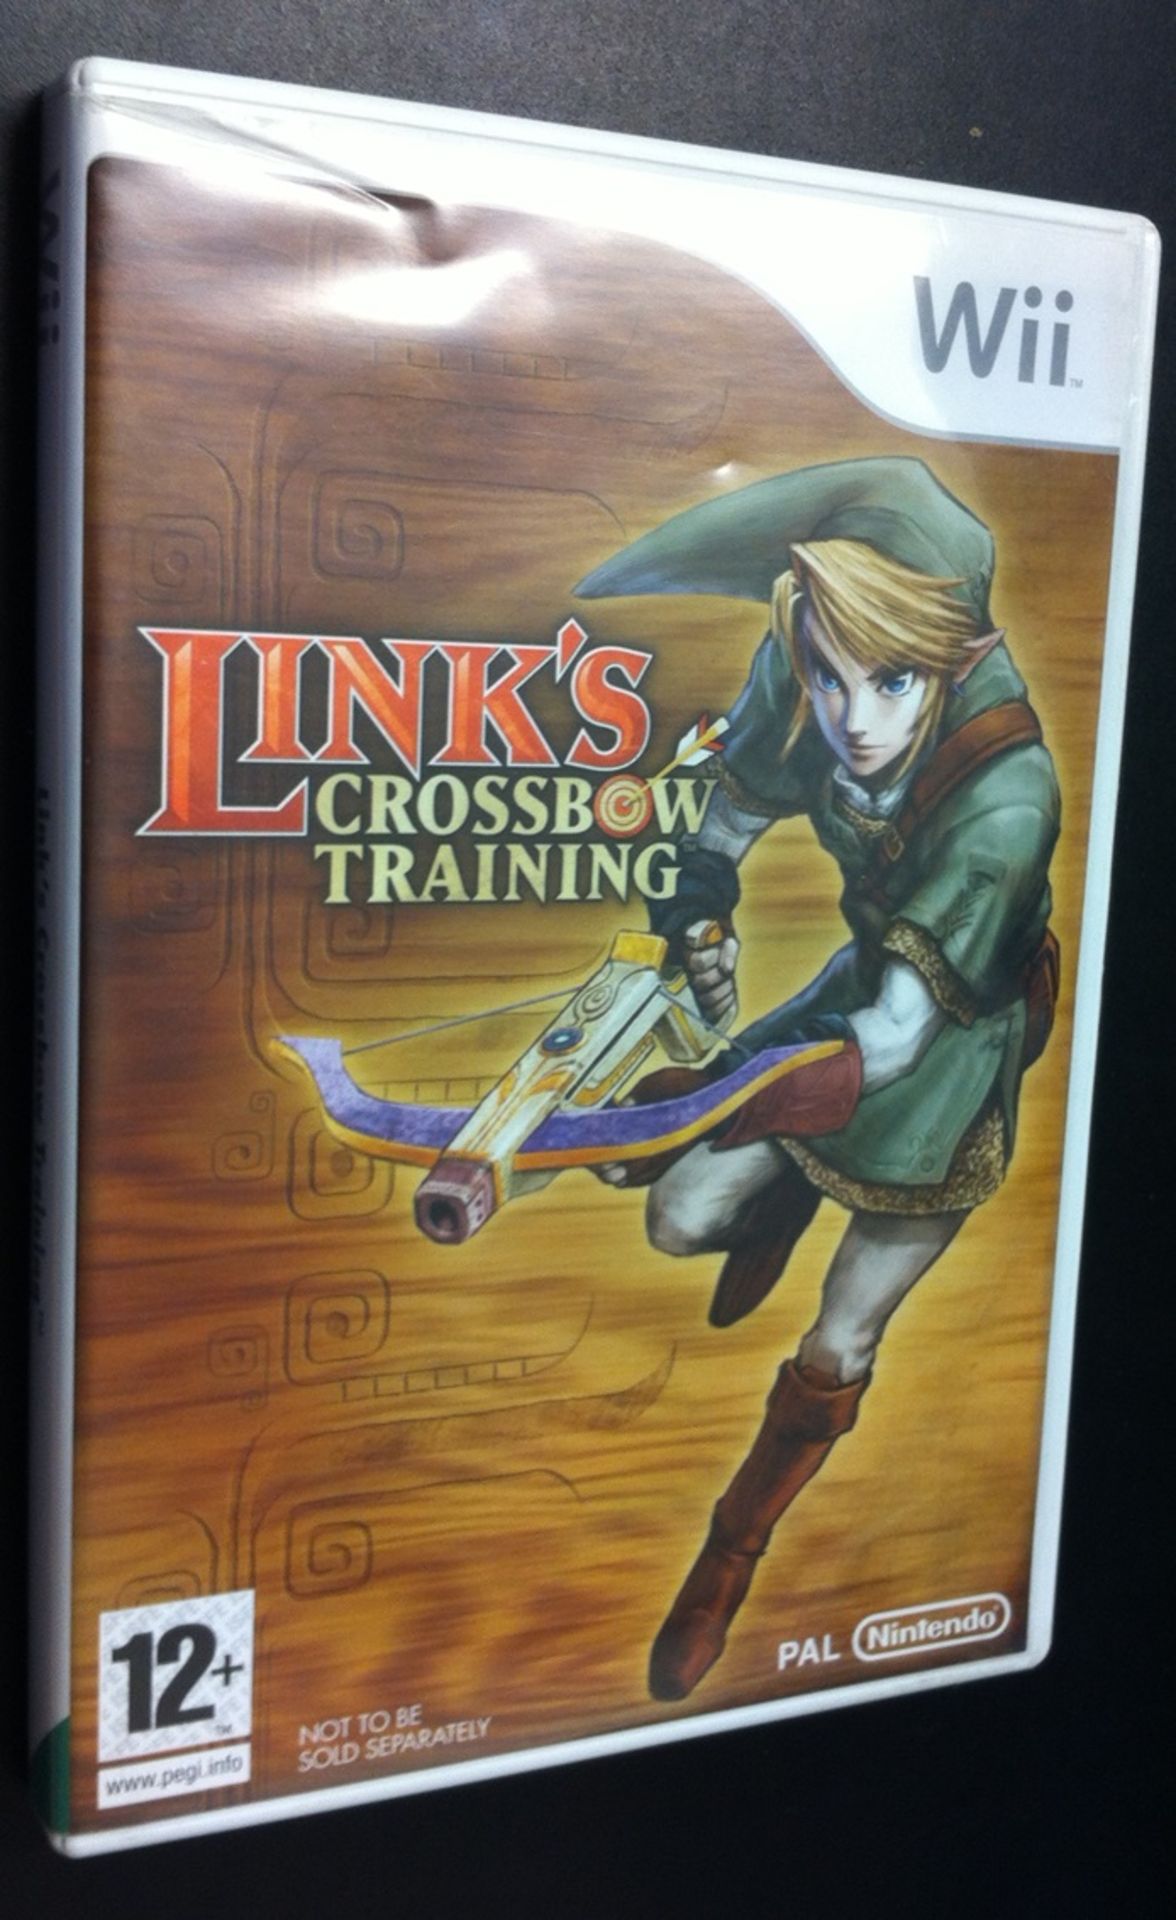 1 x Nintendo Wii Game - Zelda Links Crossbow Training - Boxed With Instructions - CL010 -